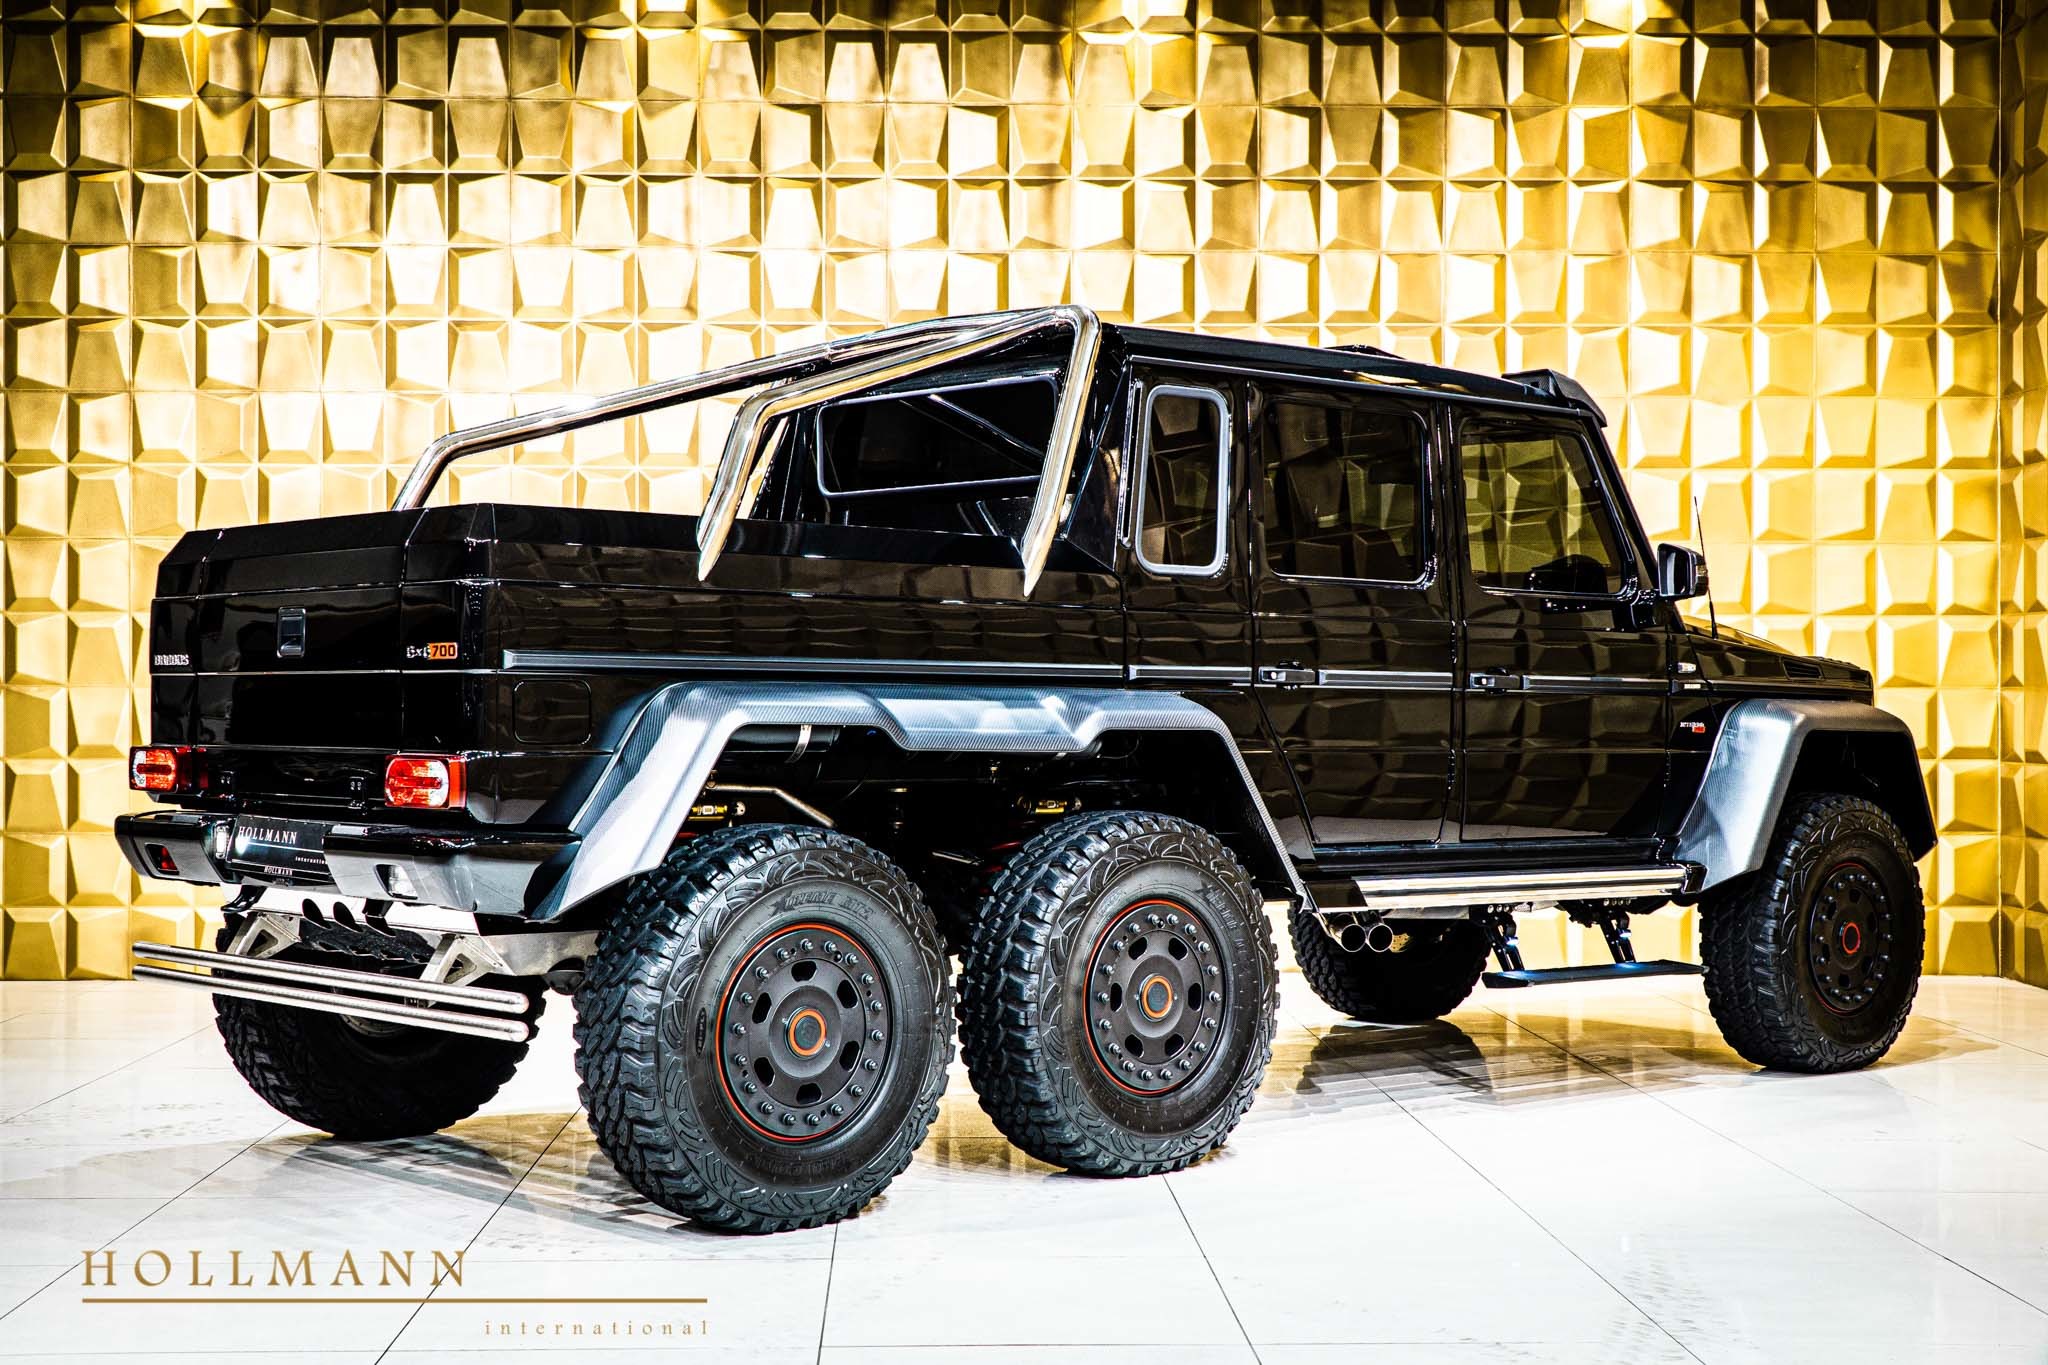 There's a 700-hp Mercedes G63 AMG 6x6 For Sale In America